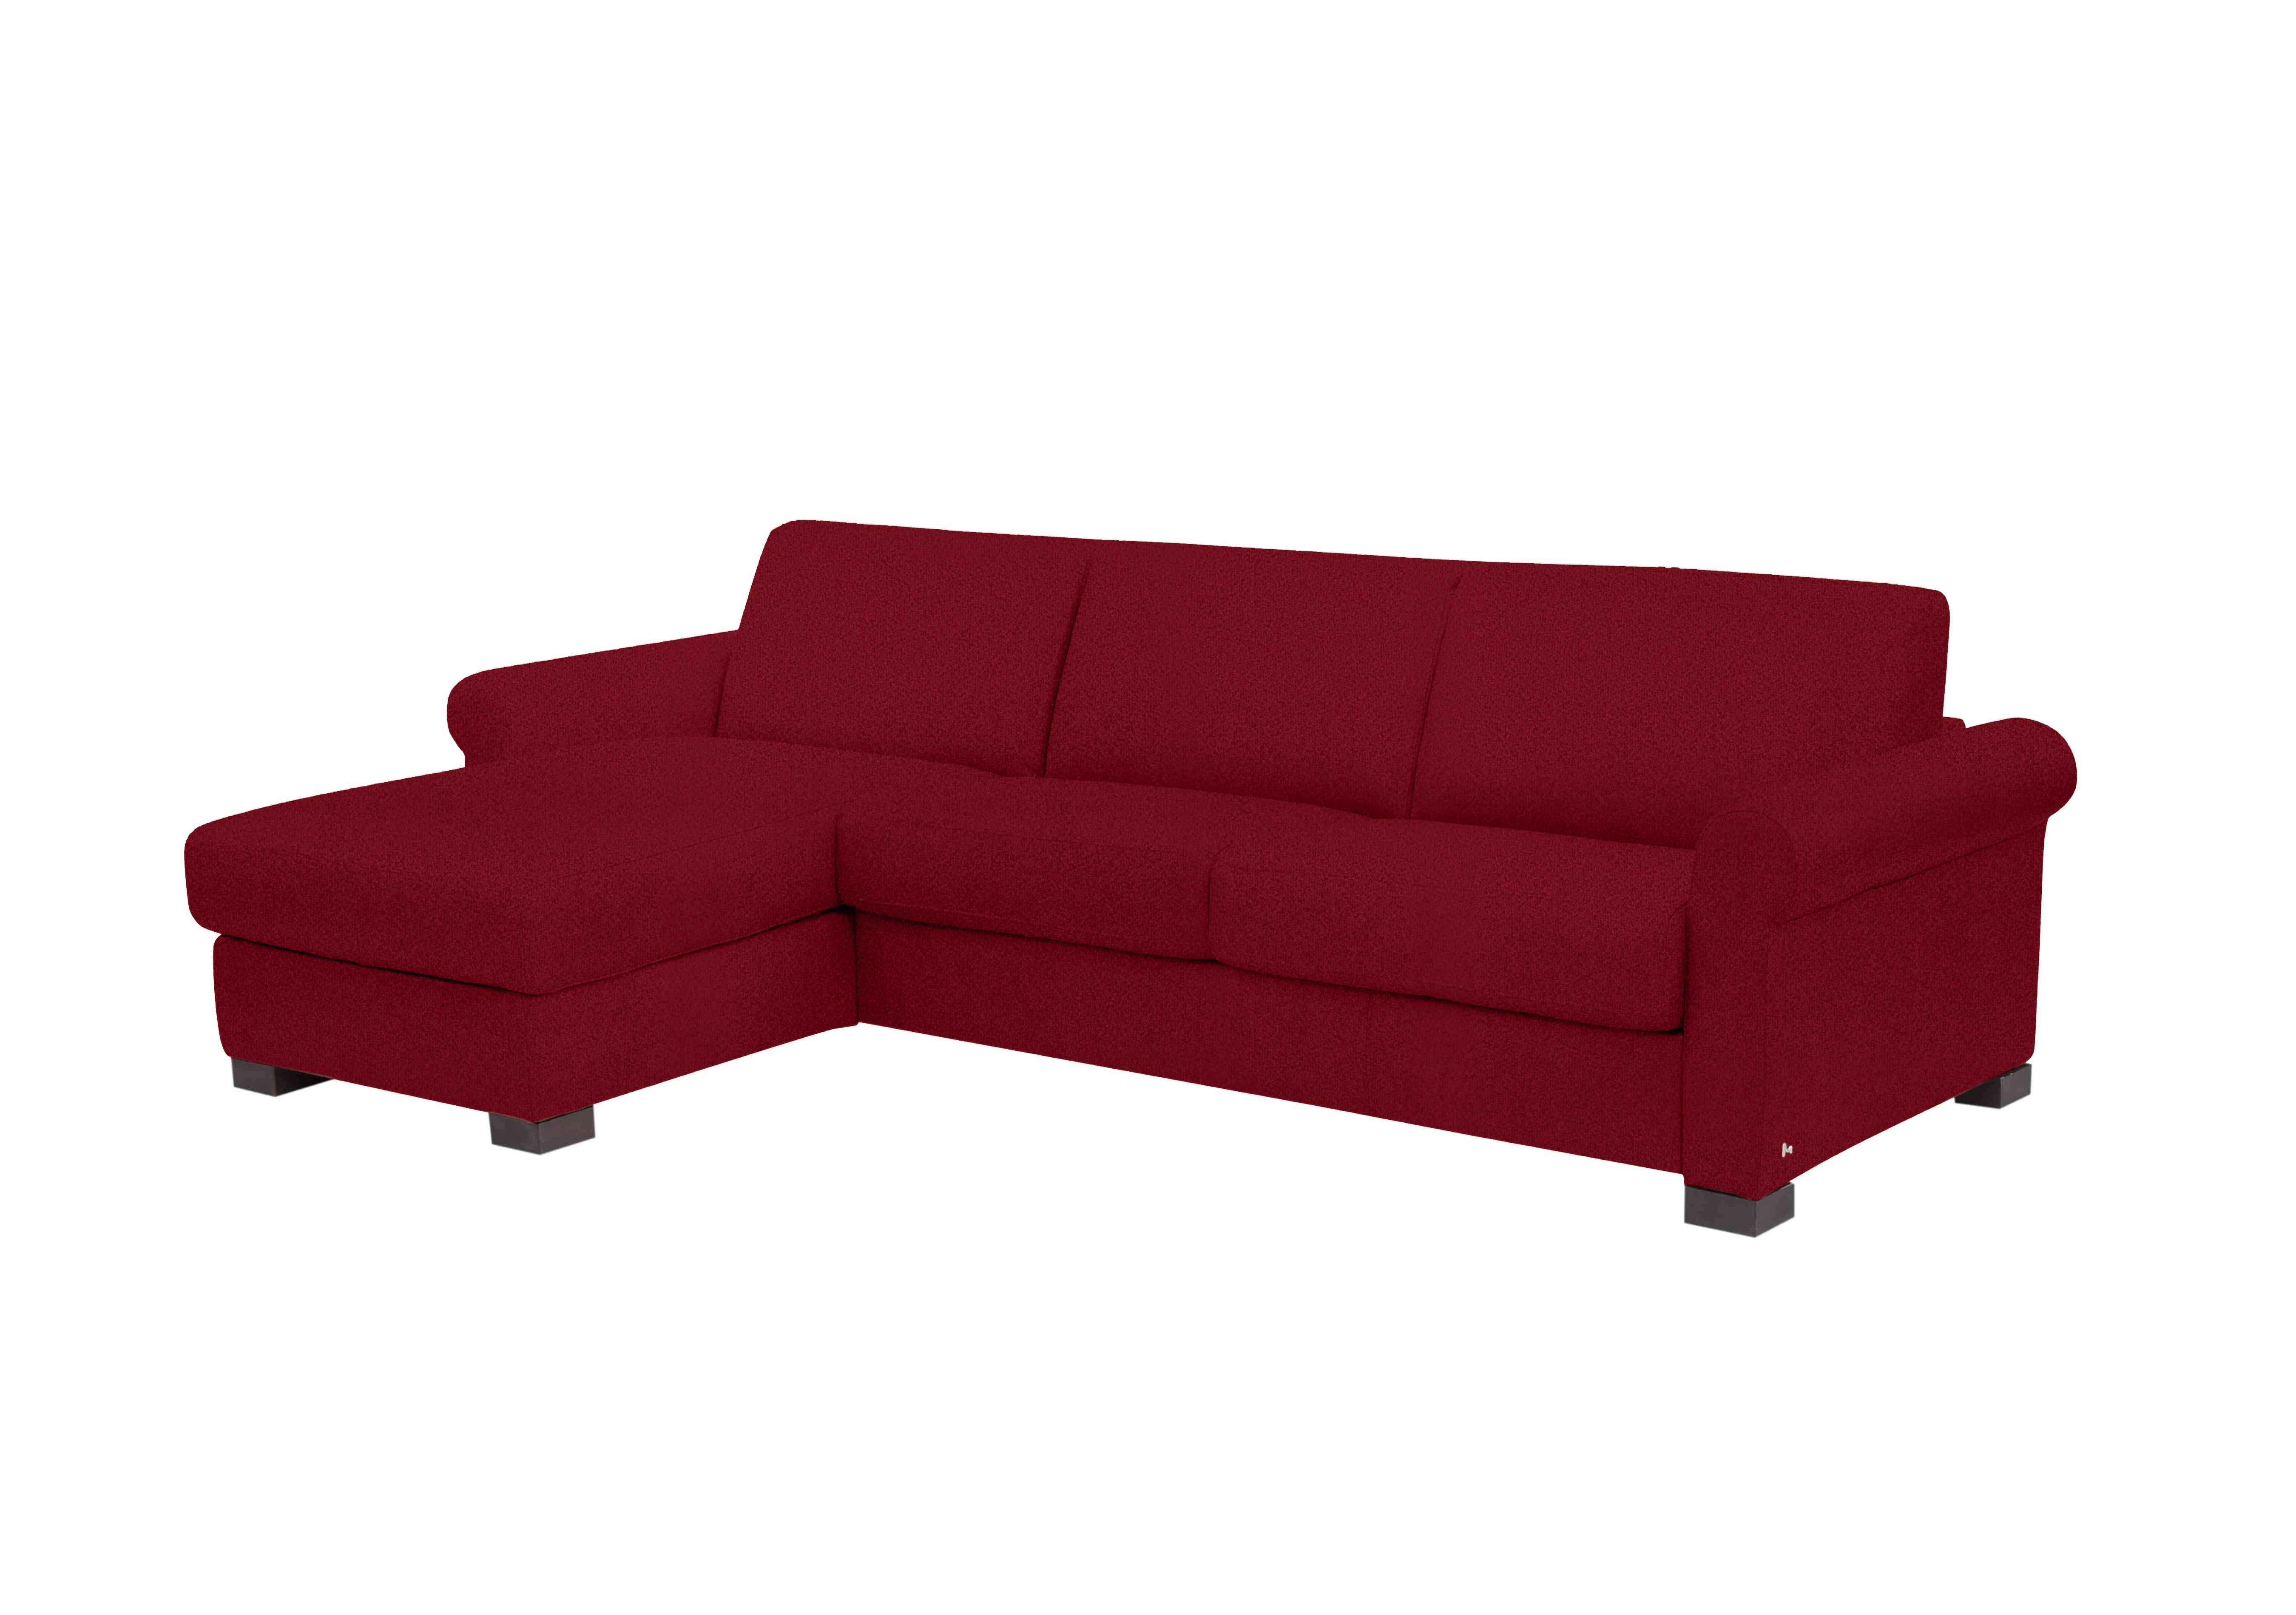 Alcova 3 Seater Fabric Sofa Bed with Storage Chaise with Scroll Arms in Coupe Rosso 305 on Furniture Village